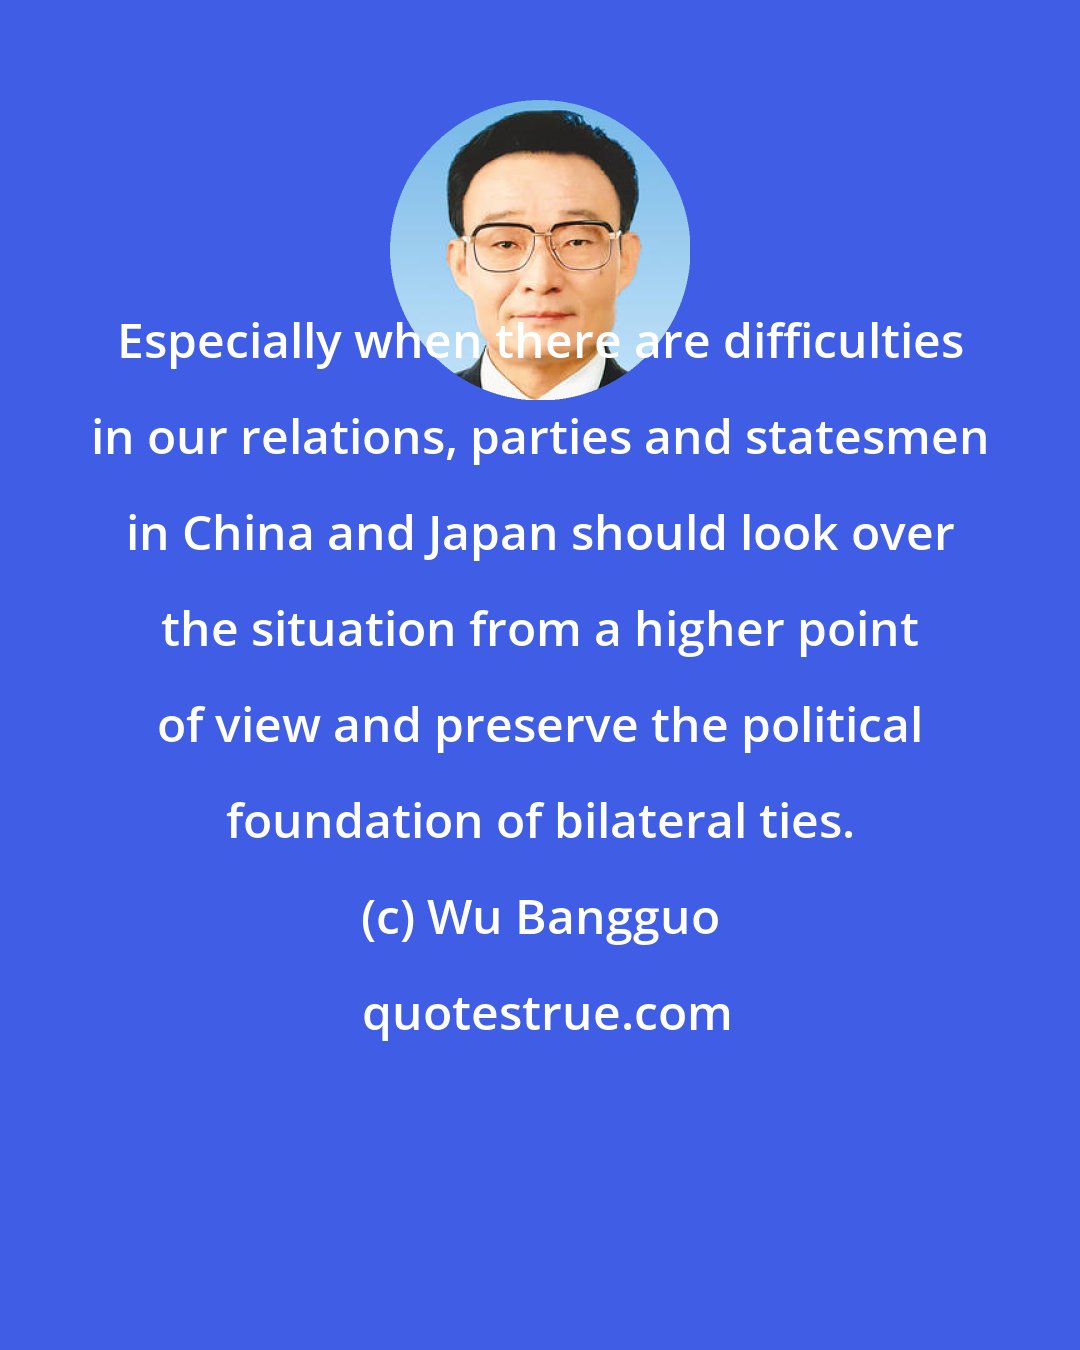 Wu Bangguo: Especially when there are difficulties in our relations, parties and statesmen in China and Japan should look over the situation from a higher point of view and preserve the political foundation of bilateral ties.